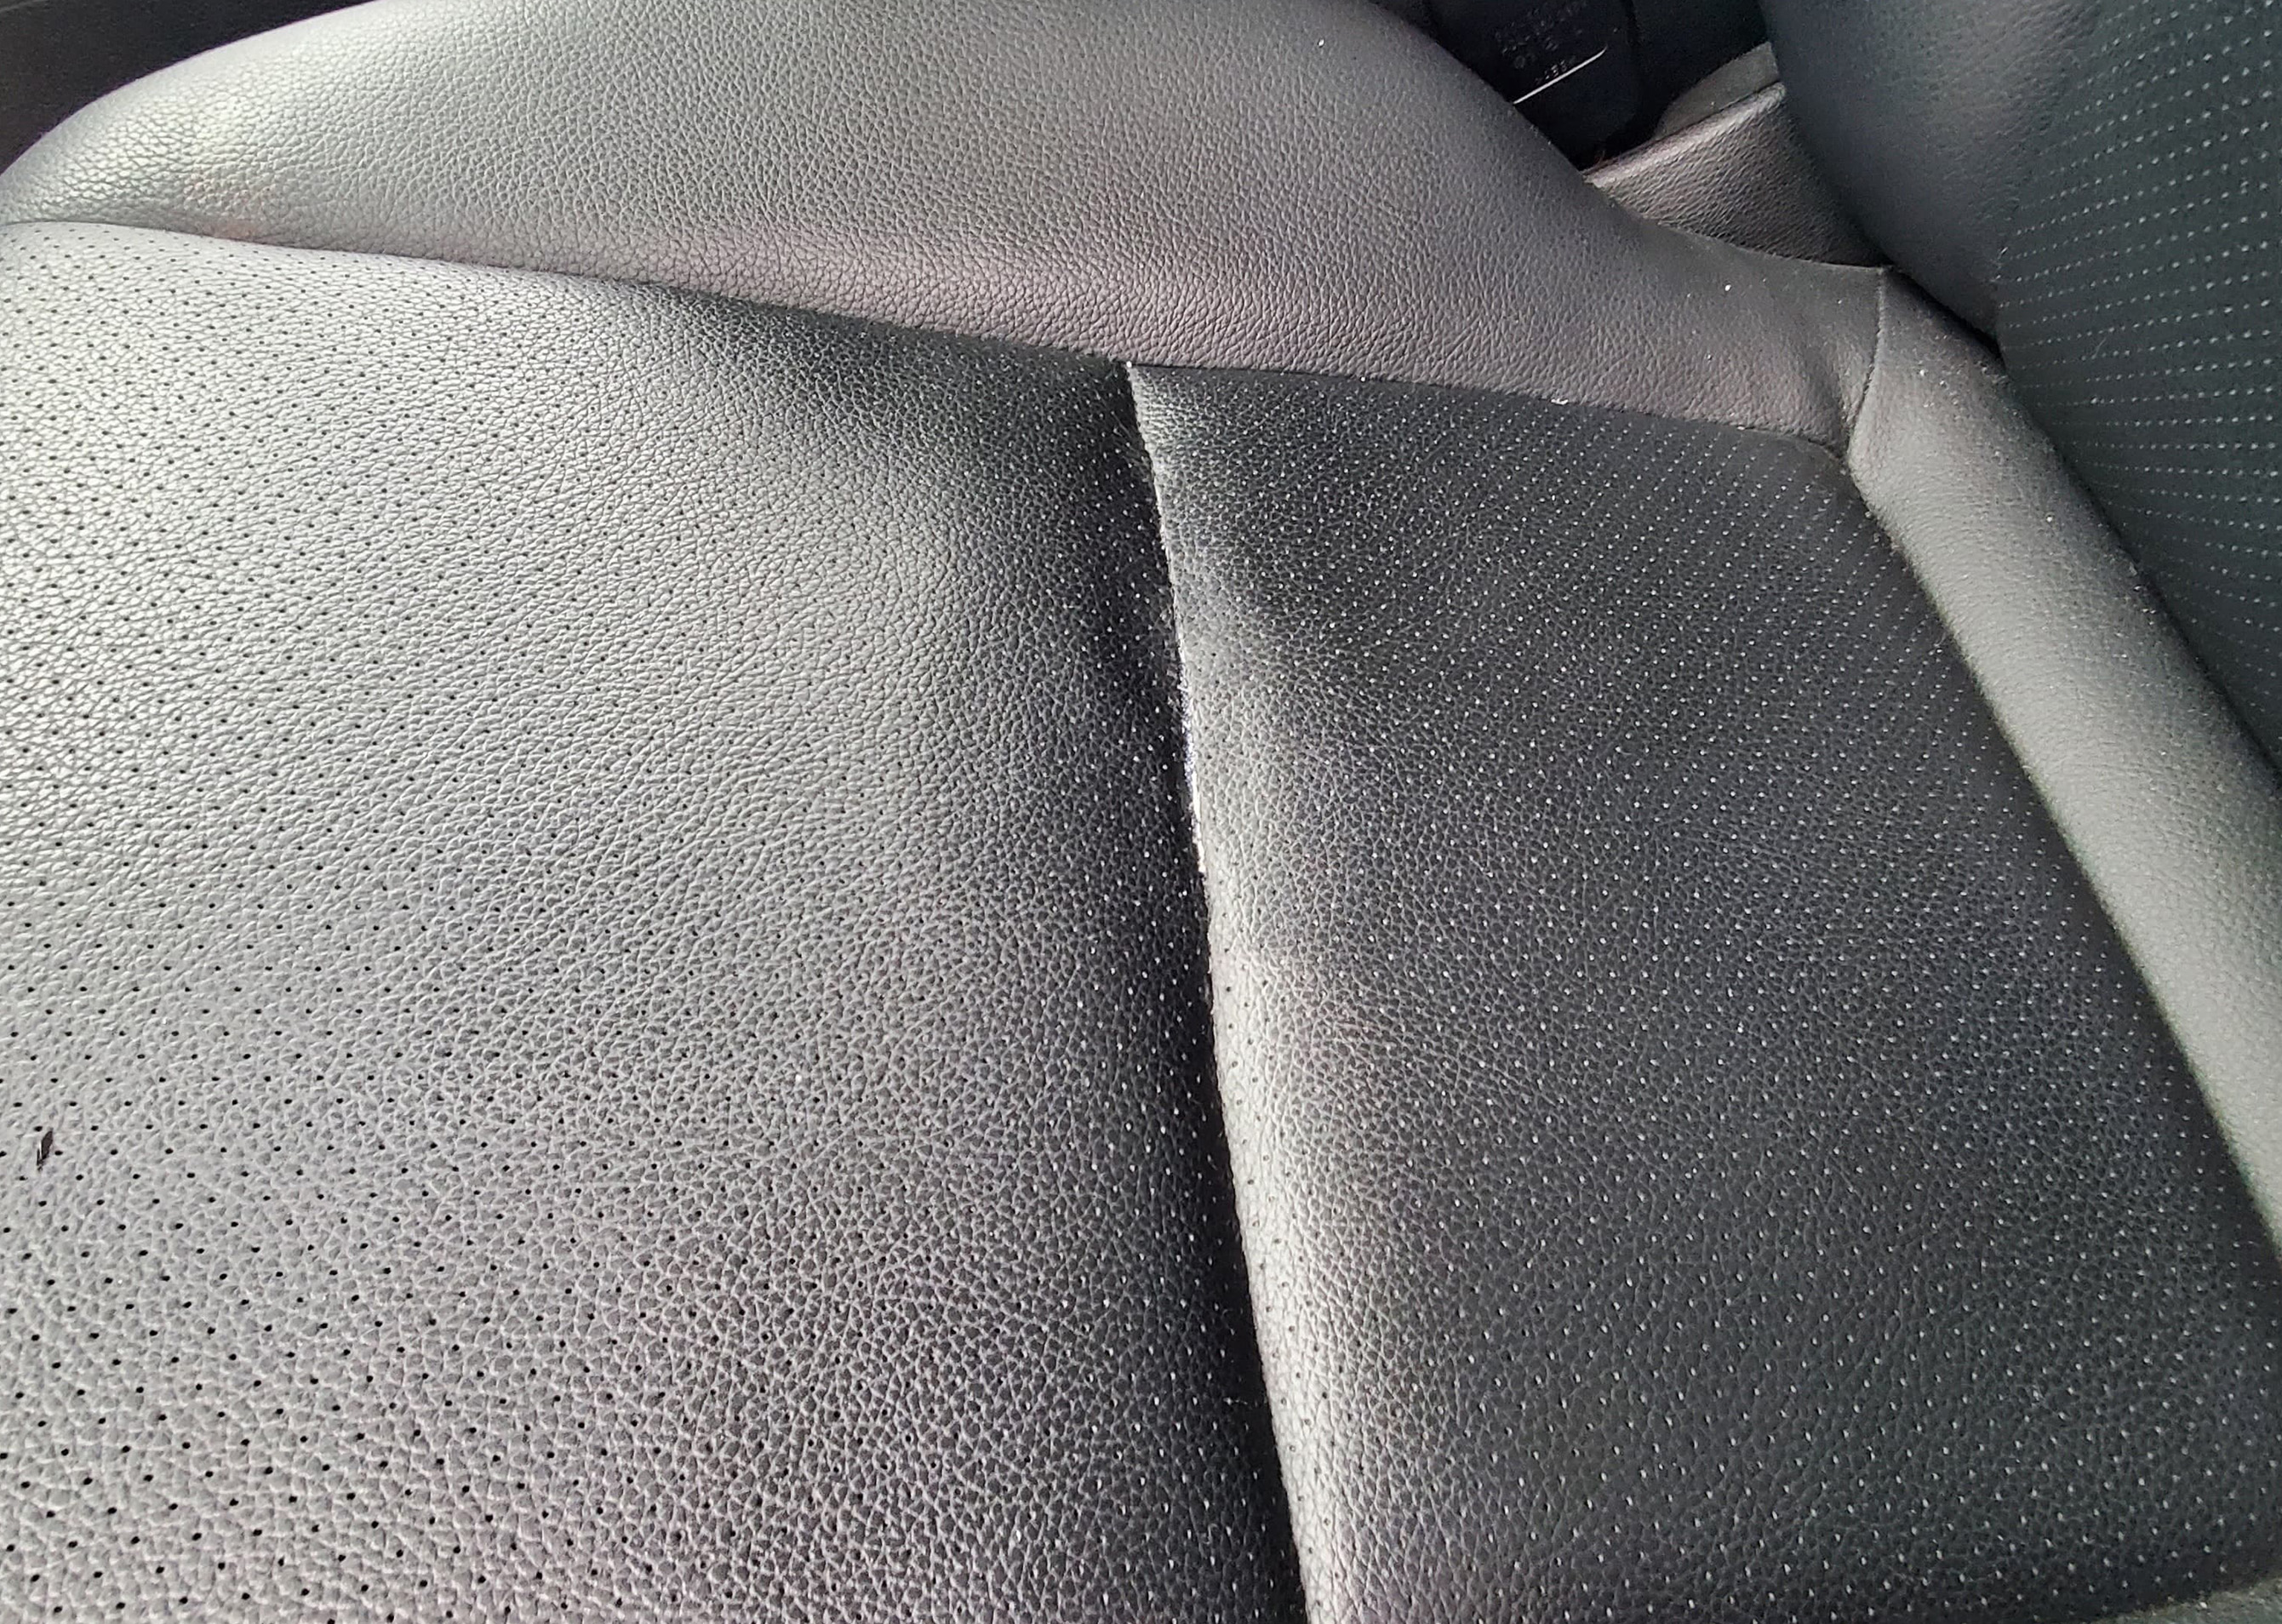 How To Repair A Leather Car Seat - How To Repair Large Hole In Leather Car Seat